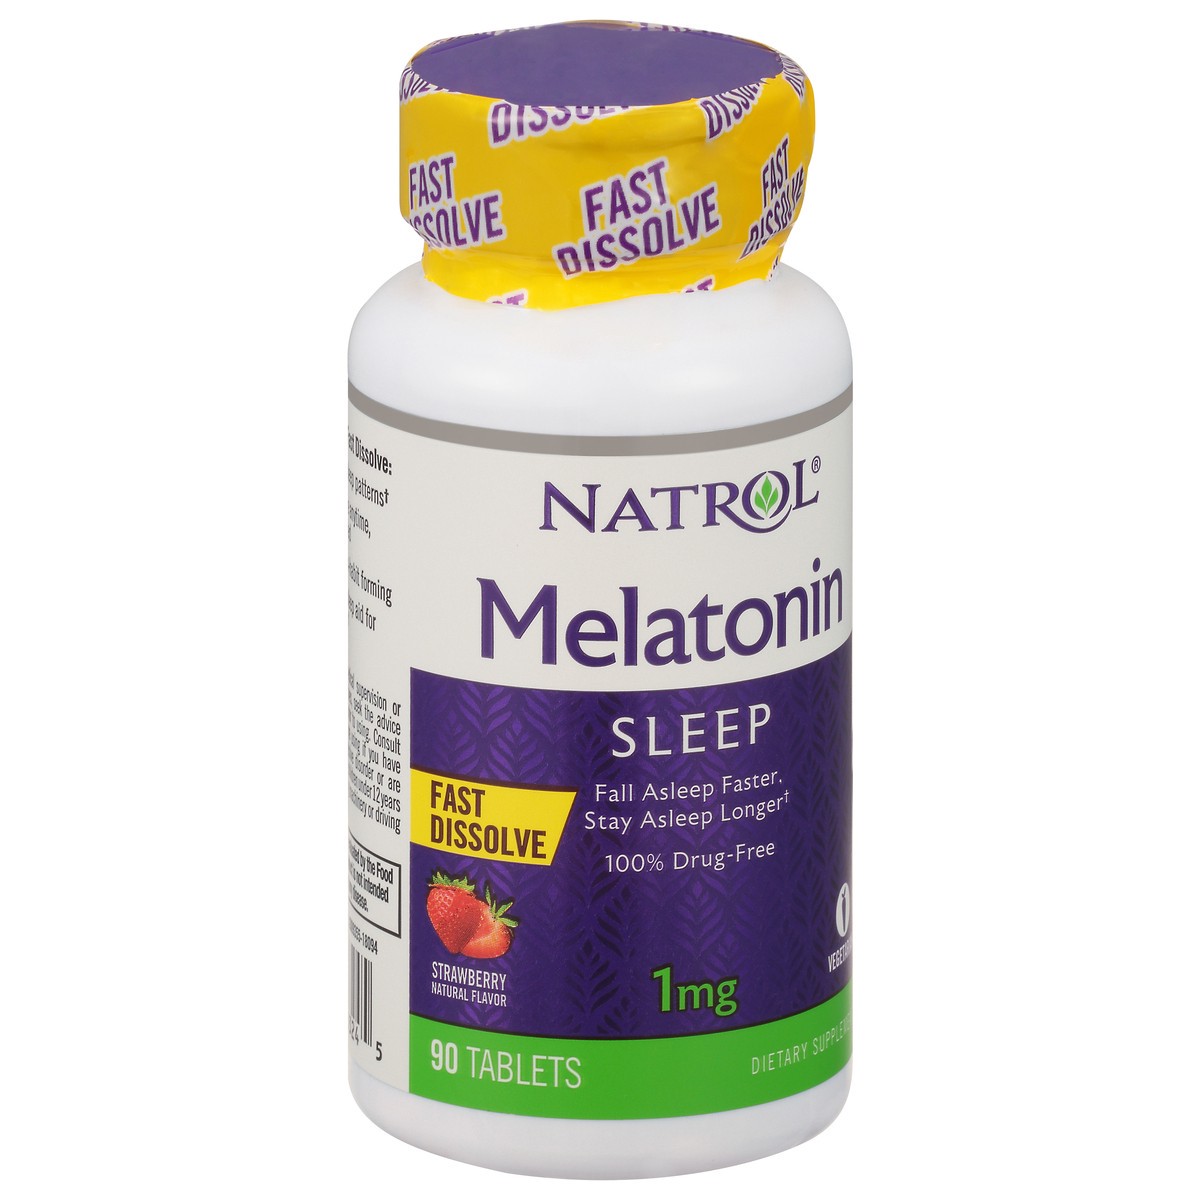 slide 2 of 9, Natrol Melatonin 1mg, Strawberry-Flavored Dietary Supplement for Restful Sleep, 90 Fast-Dissolve Tablets, 90 Day Supply, 90 ct